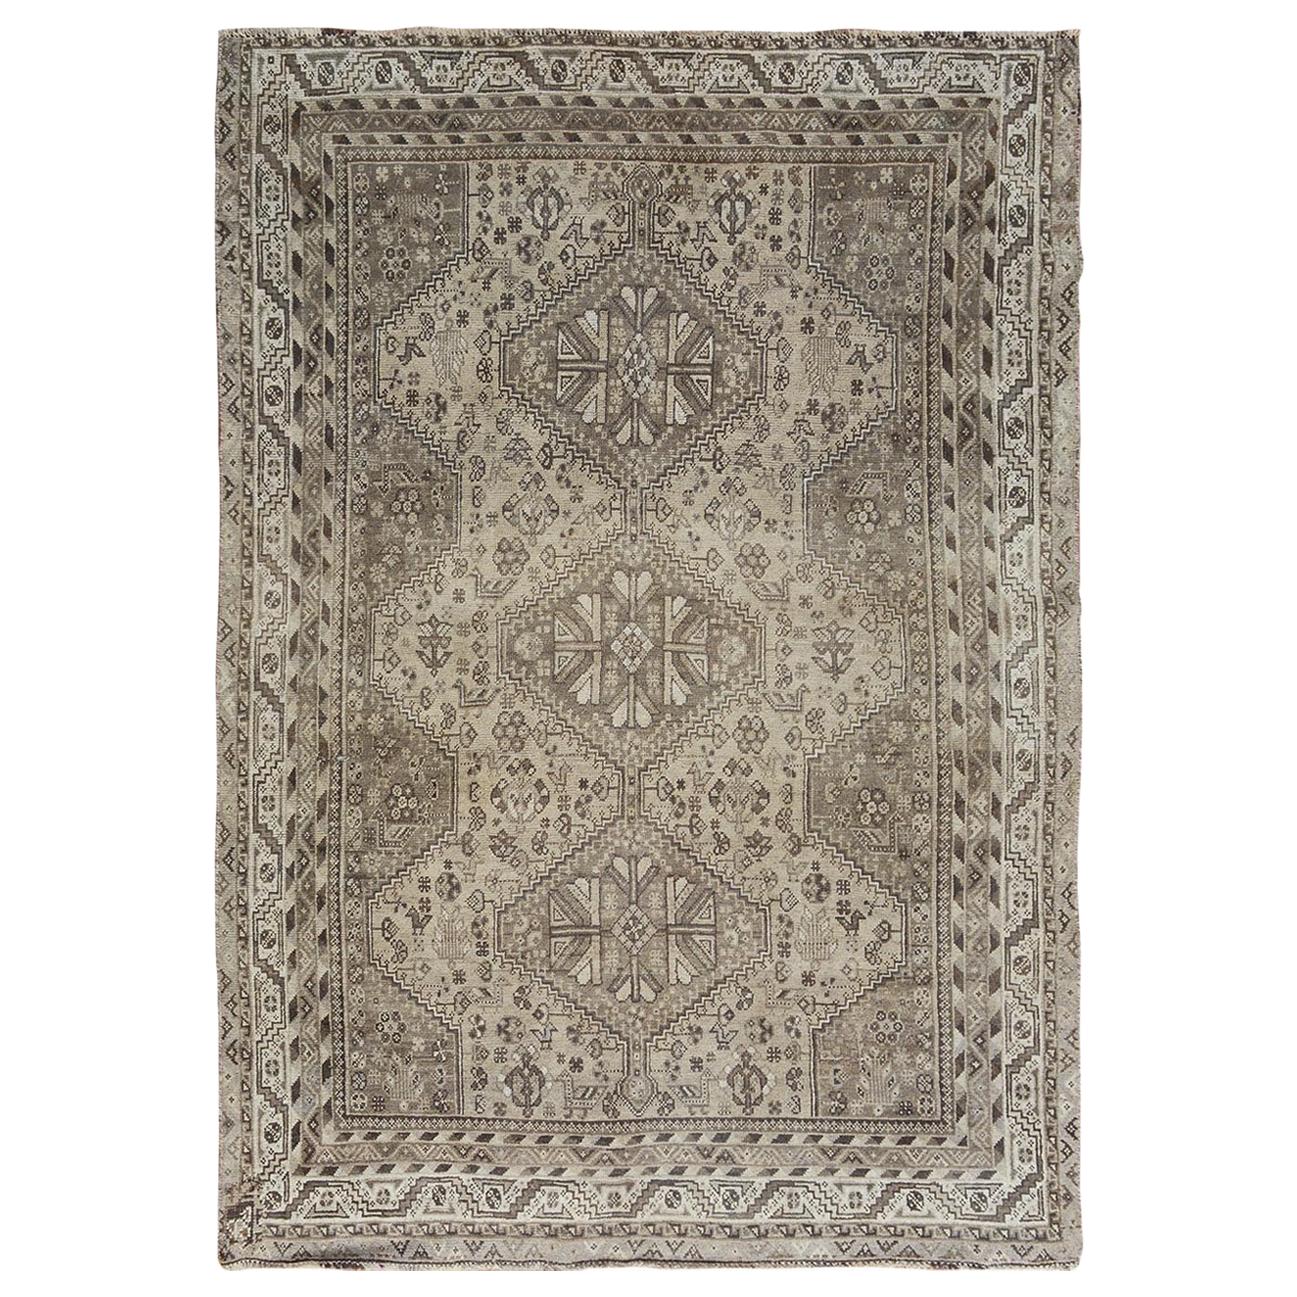 Natural Colors Old and Worn Down Persian Shiraz Hand Knotted Oriental Rug